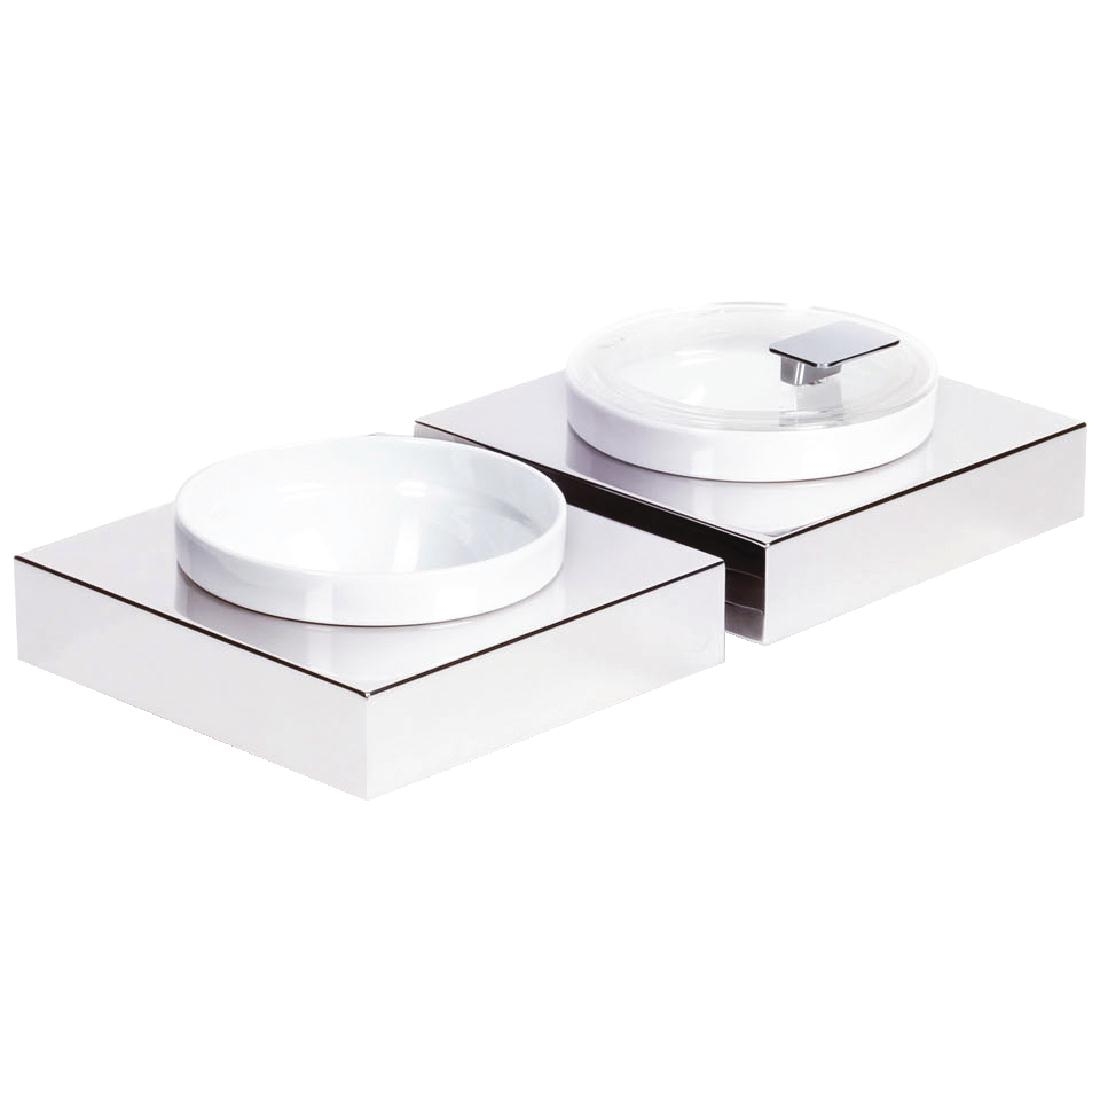 APS Frames Stainless Steel Small Square Buffet Bowl Box